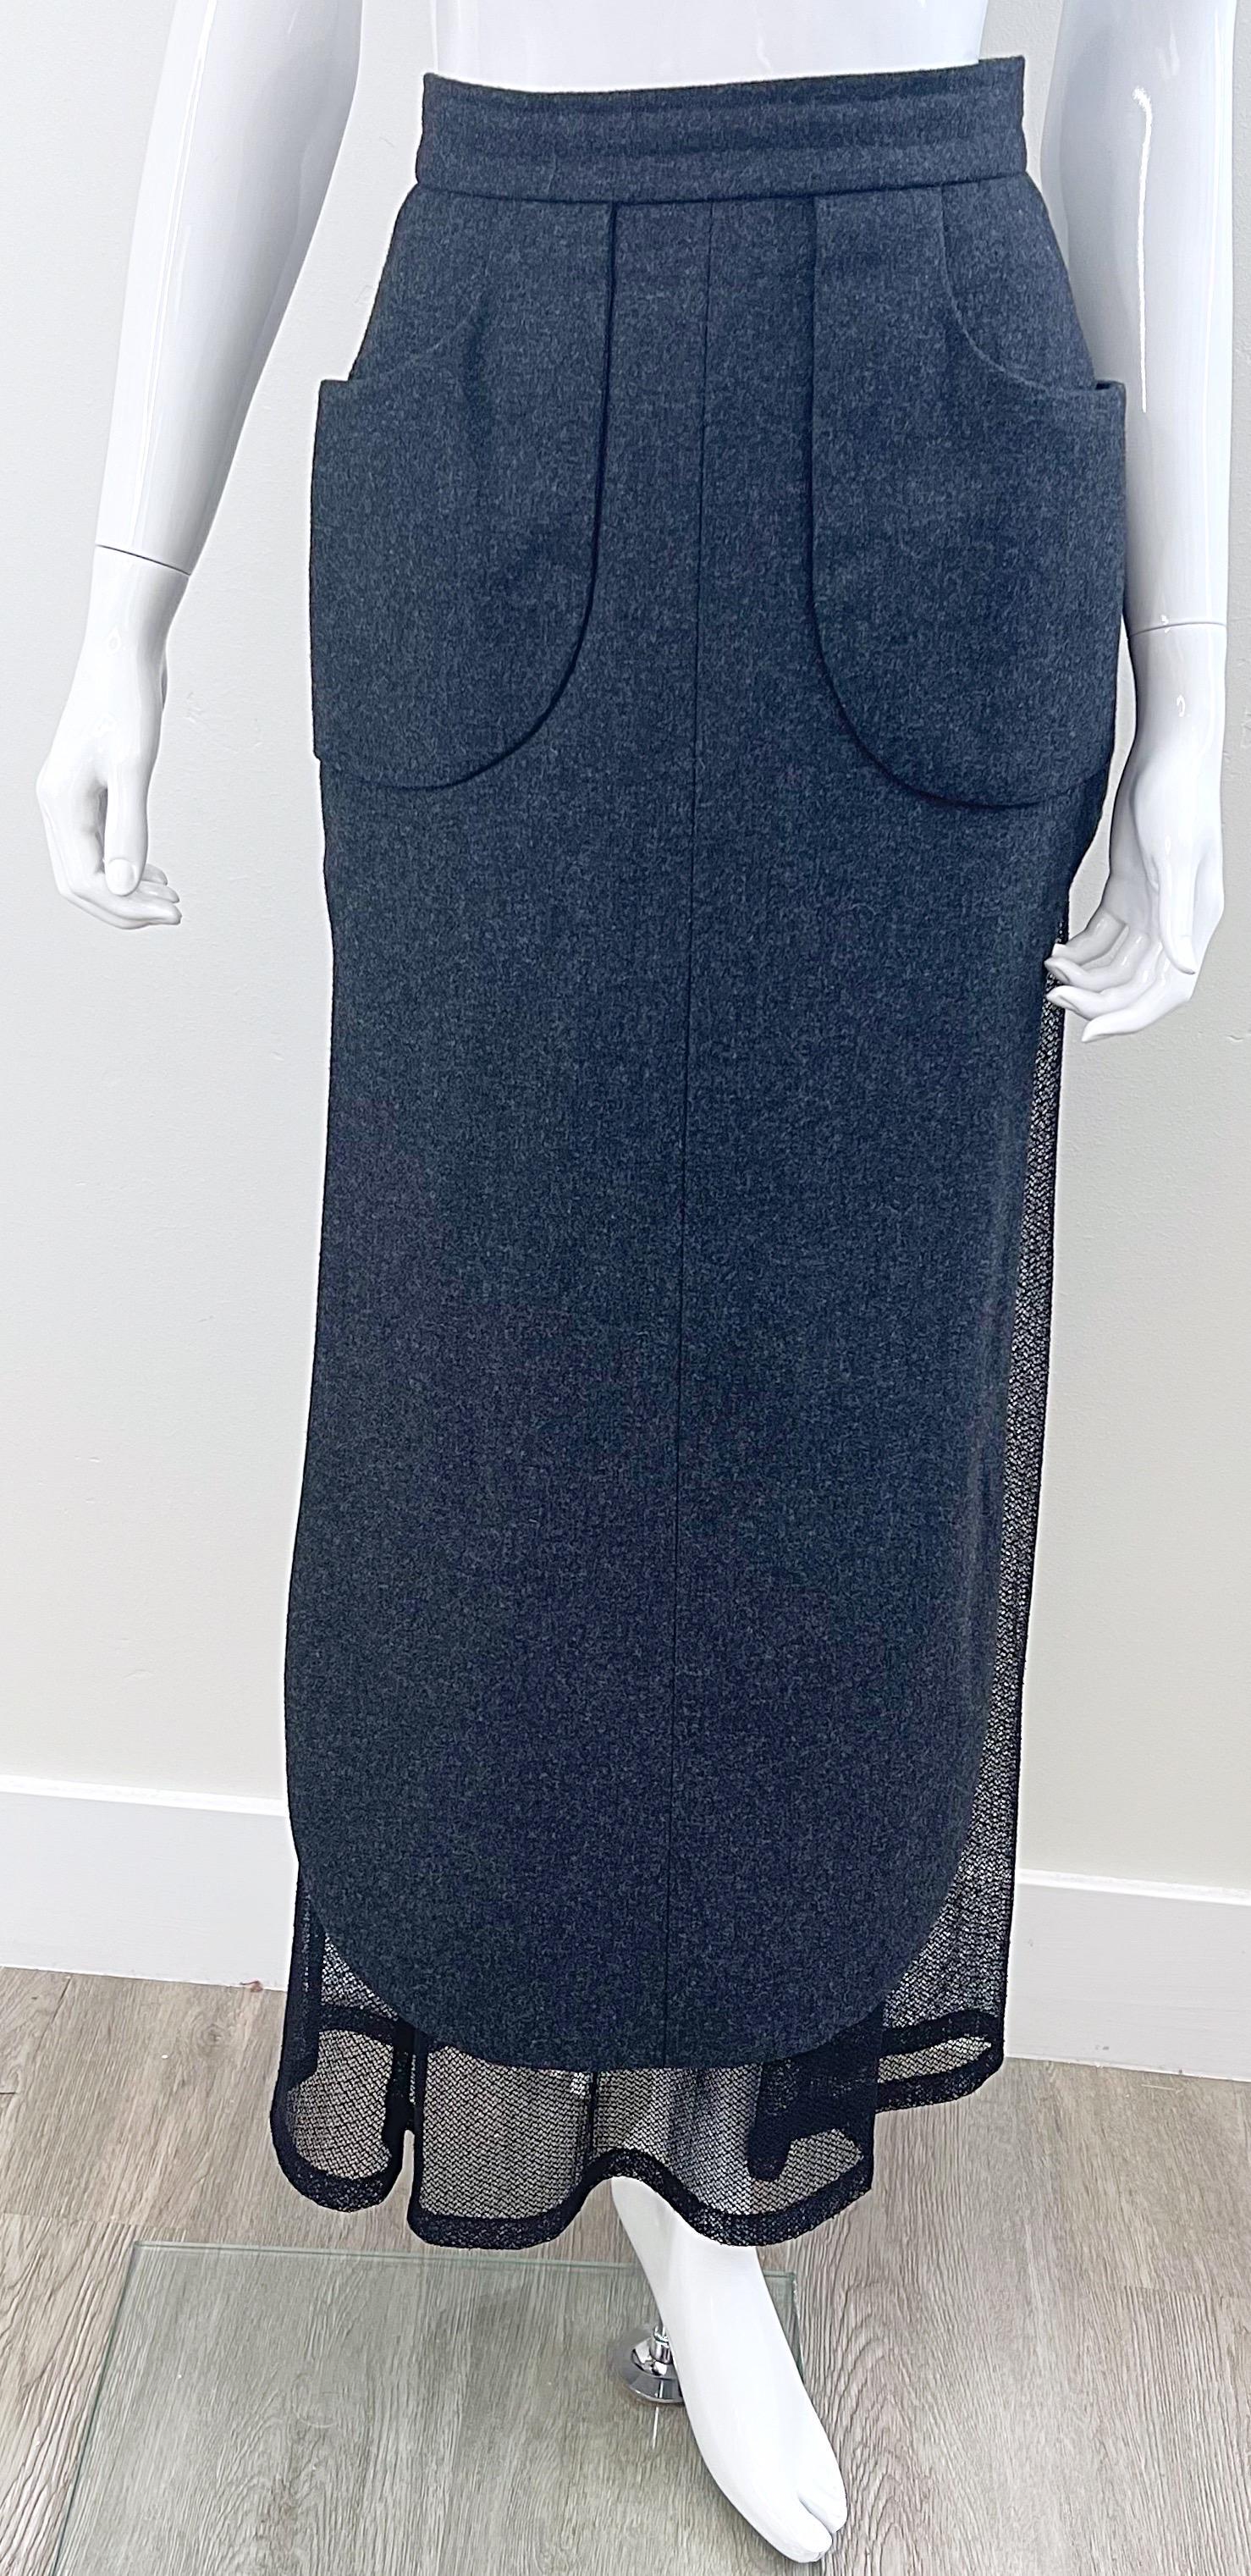 Karl Lagerfeld 1980s Grey Wool + Black Lace Vintage 80s Mini Maxi Skirt For Sale 4